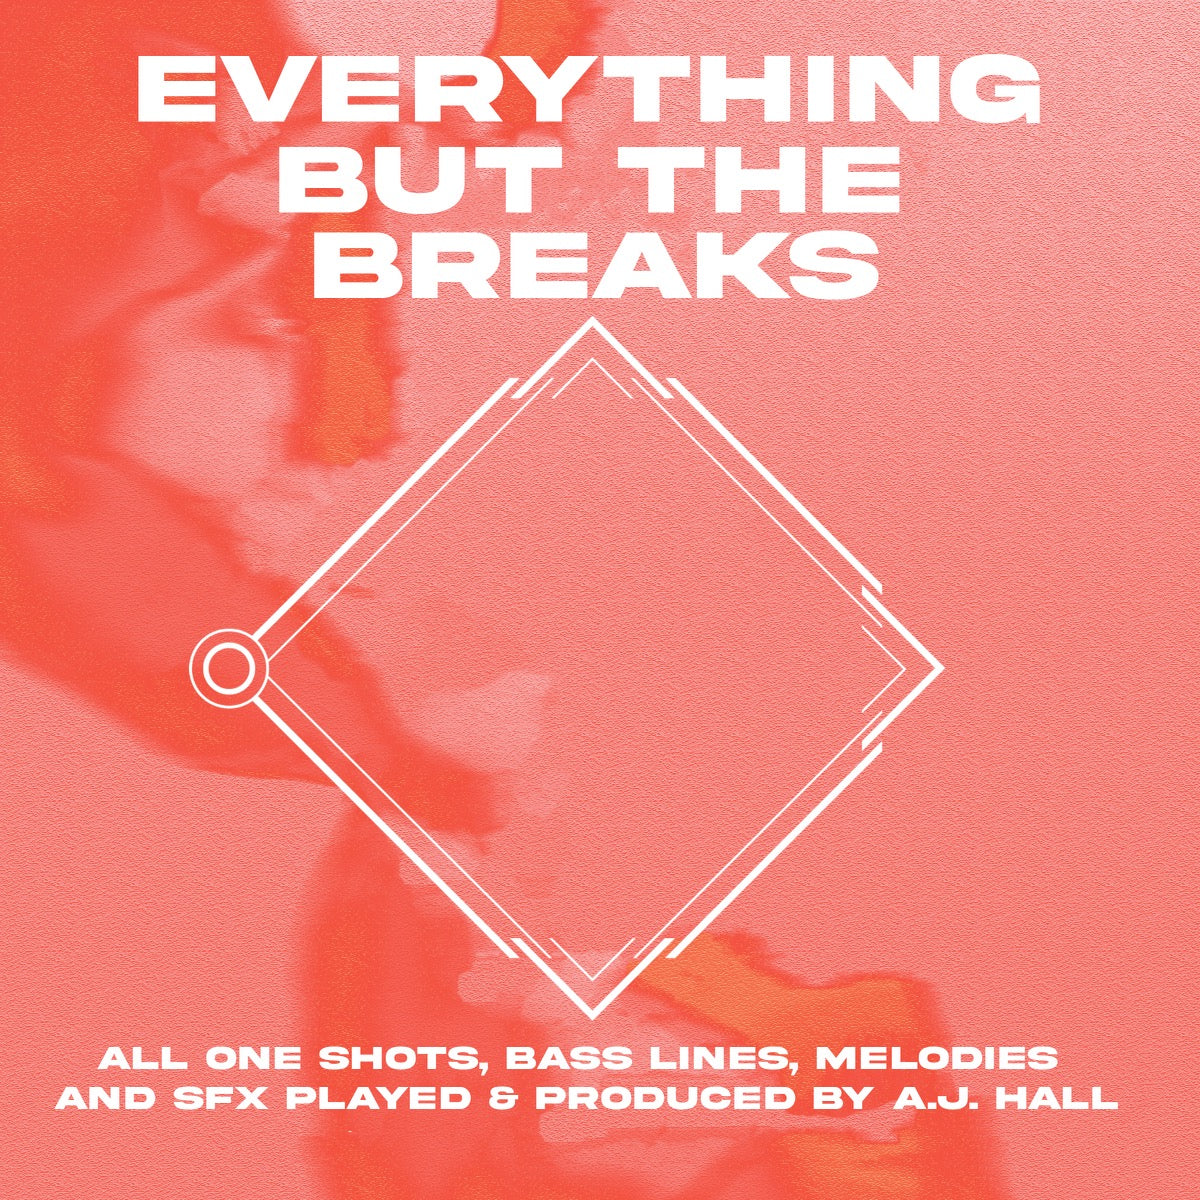 "EVERYTHING BUT THE BREAKS BUNDLE" (ALL THE ONE SHOTS, MELODIES AND BASS LINES))